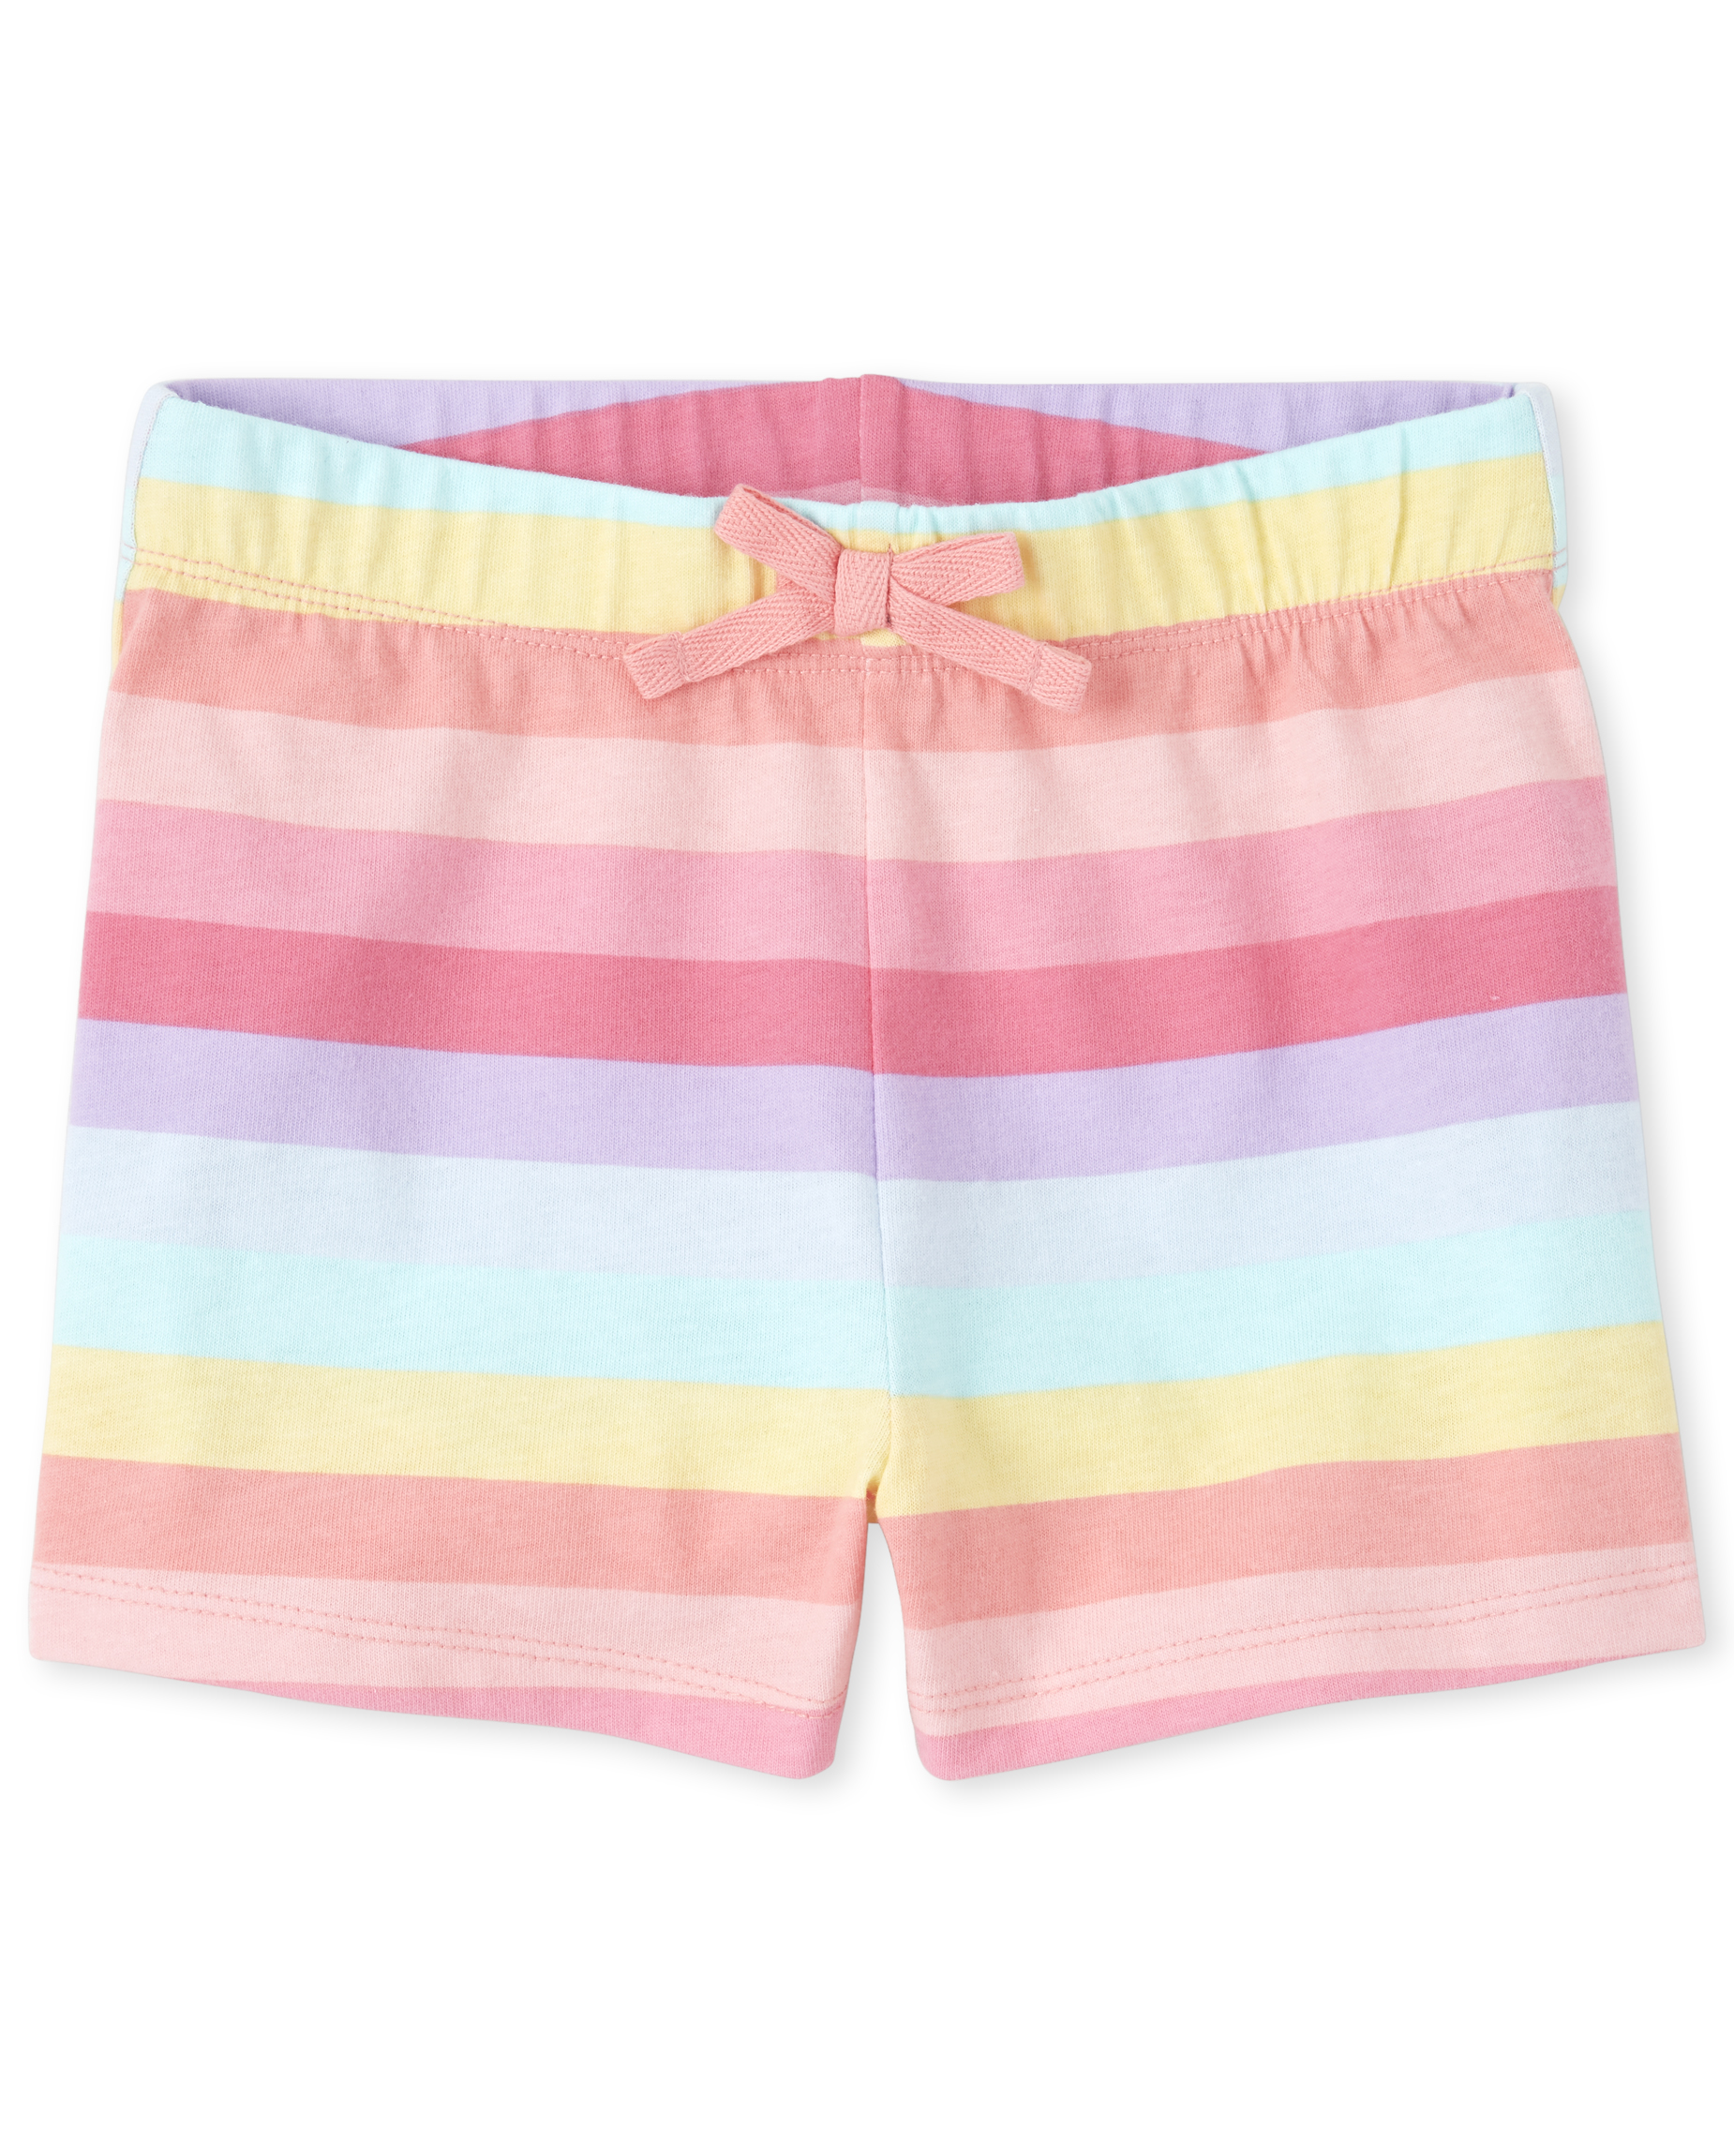 The Childrens Place Girls Printed Skorts 